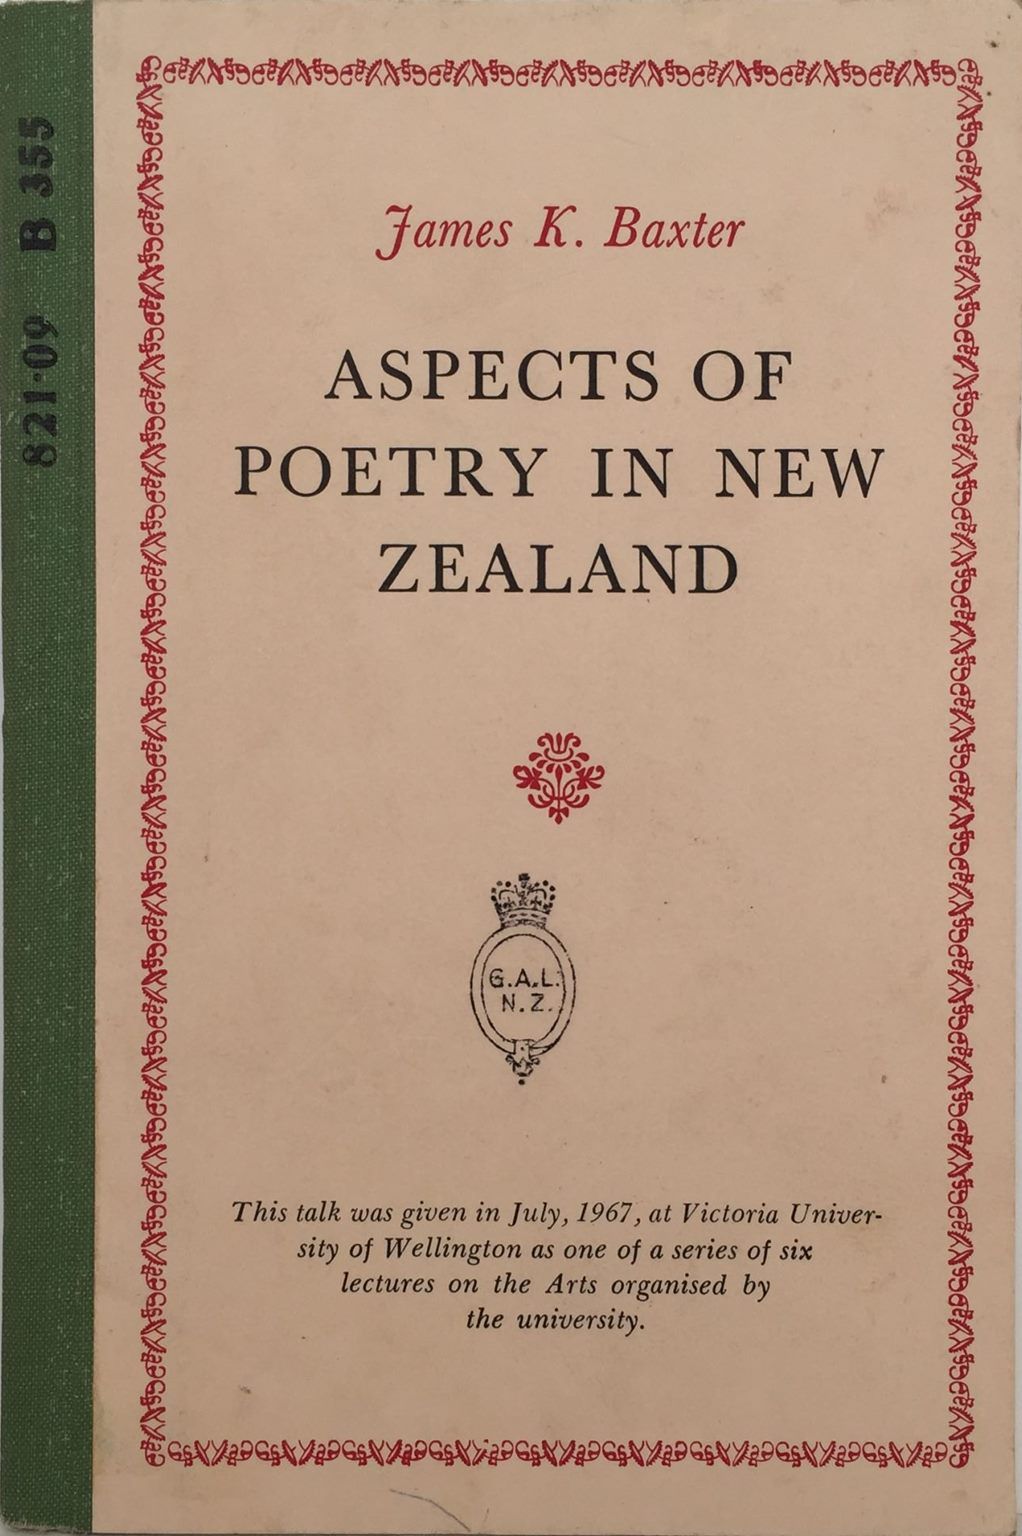 ASPECTS OF POETRY IN NEW ZEALAND